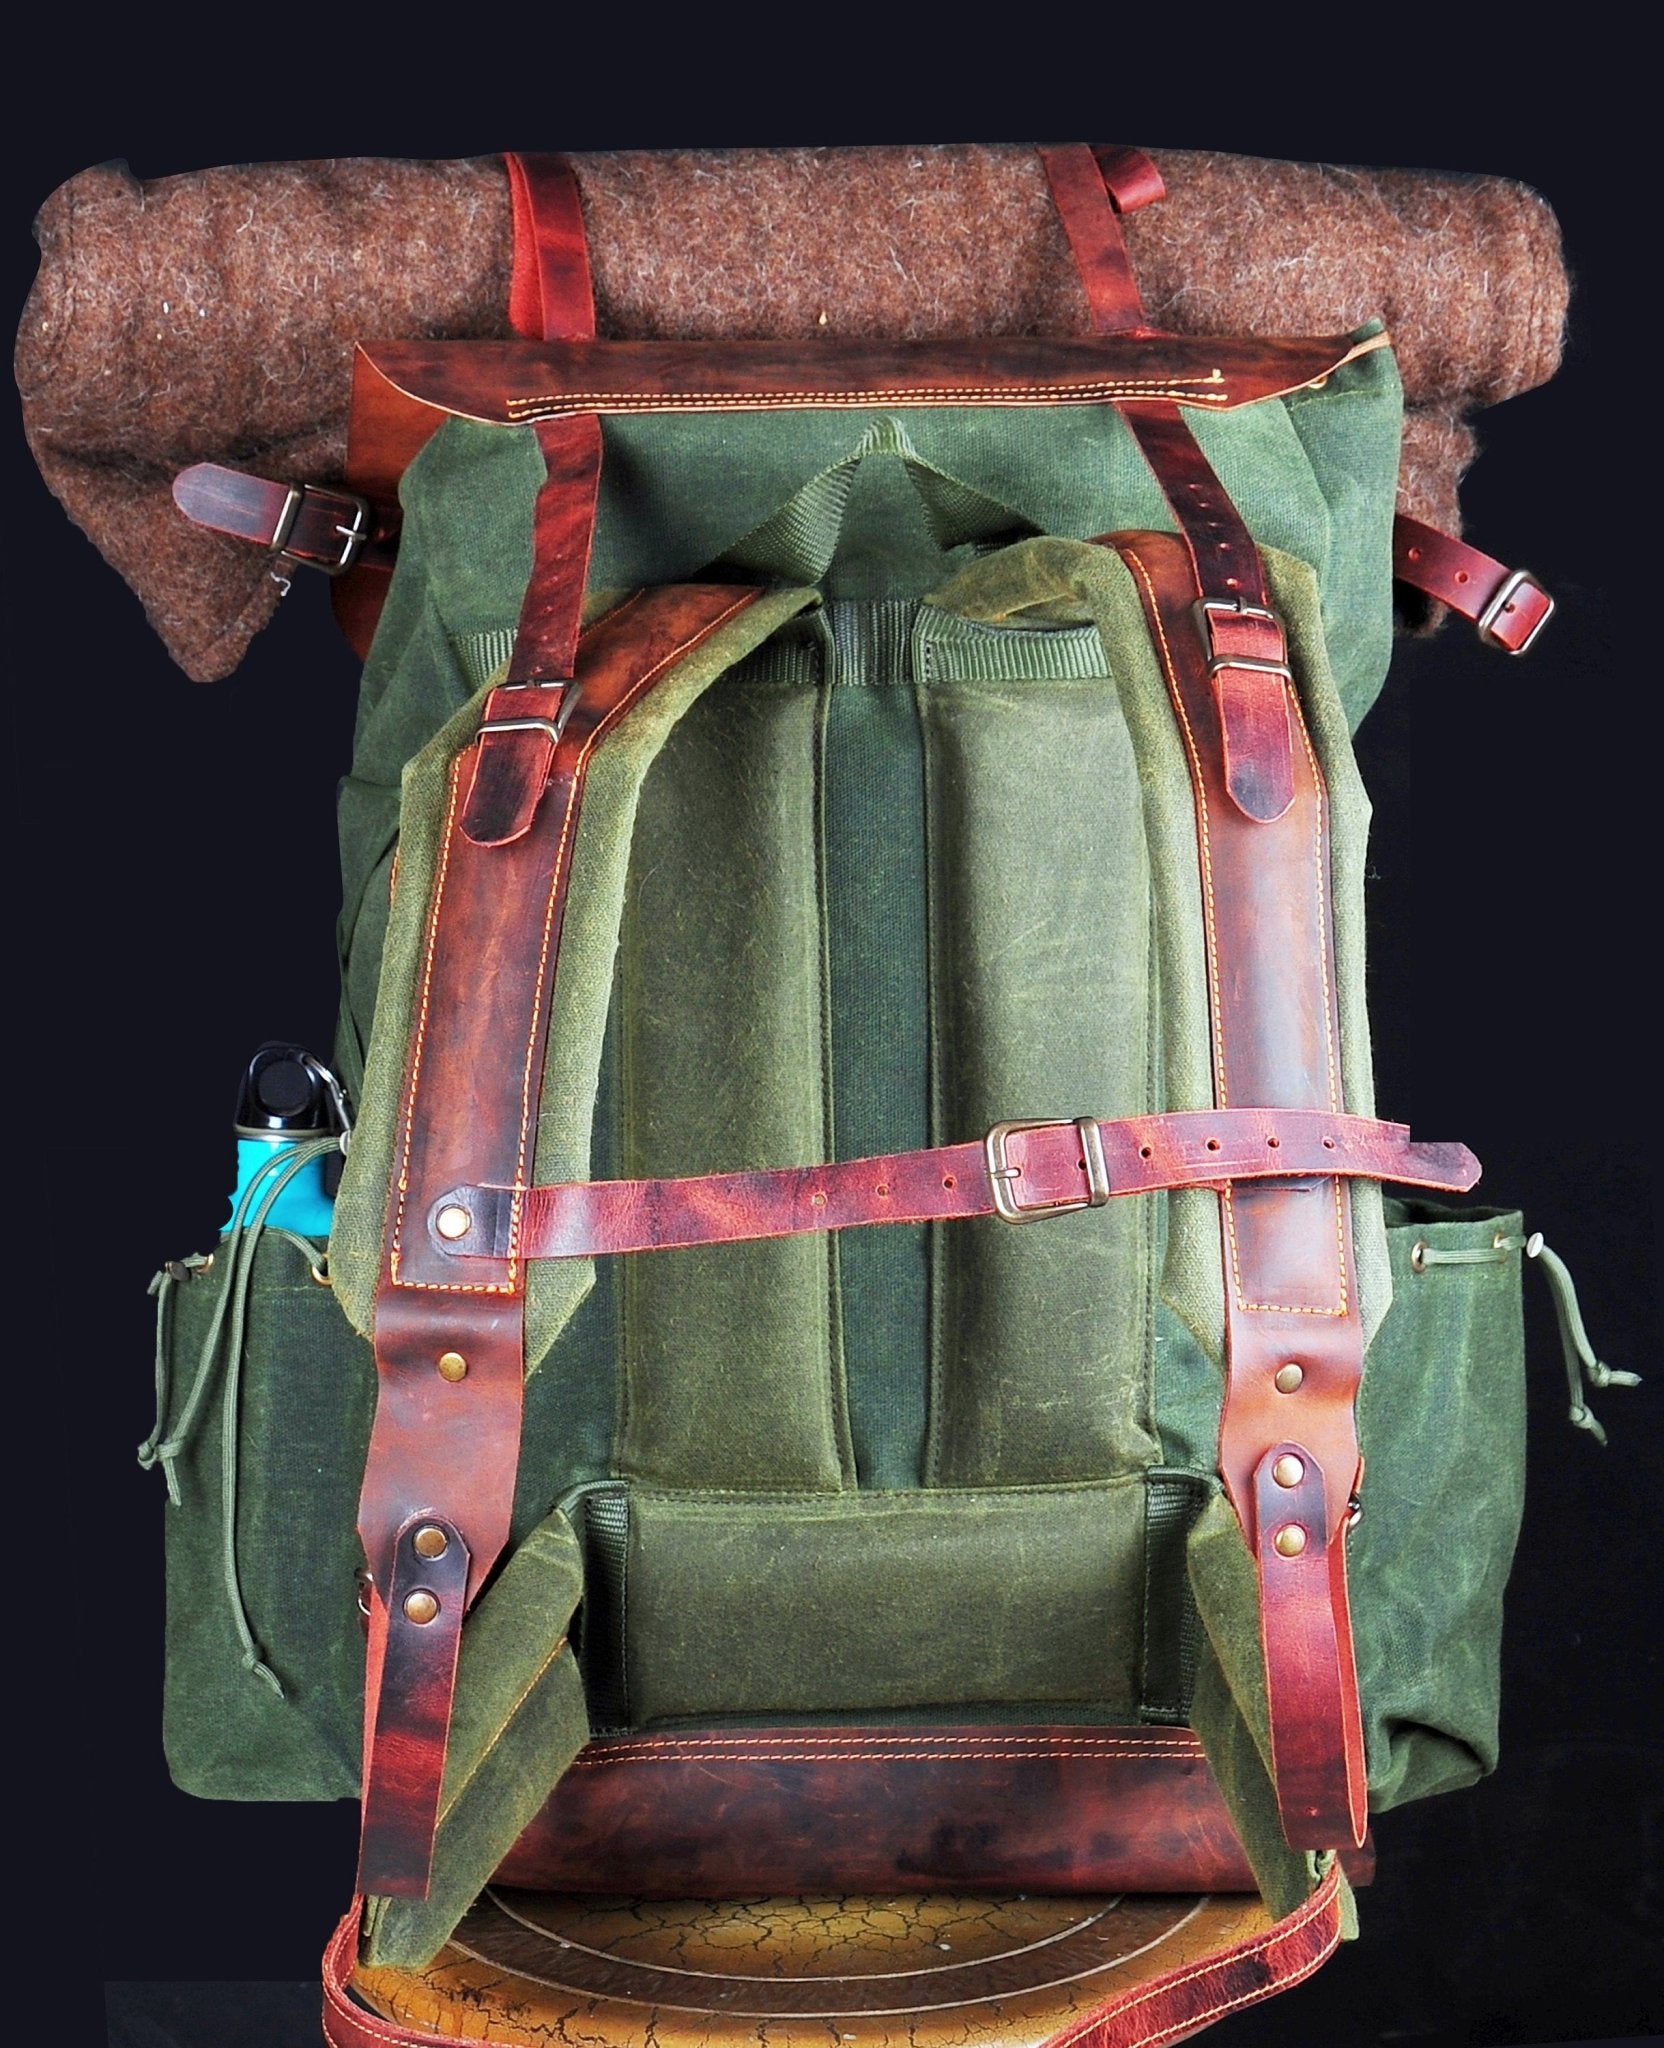 Green Bestseller | Leather Backpack | Waxed Canvas Bag | Travel | Bushcraft | Camping | Green, Brown Options | 50 Liters | Personalization bushcraft - camping - hiking backpack 99percenthandmade   